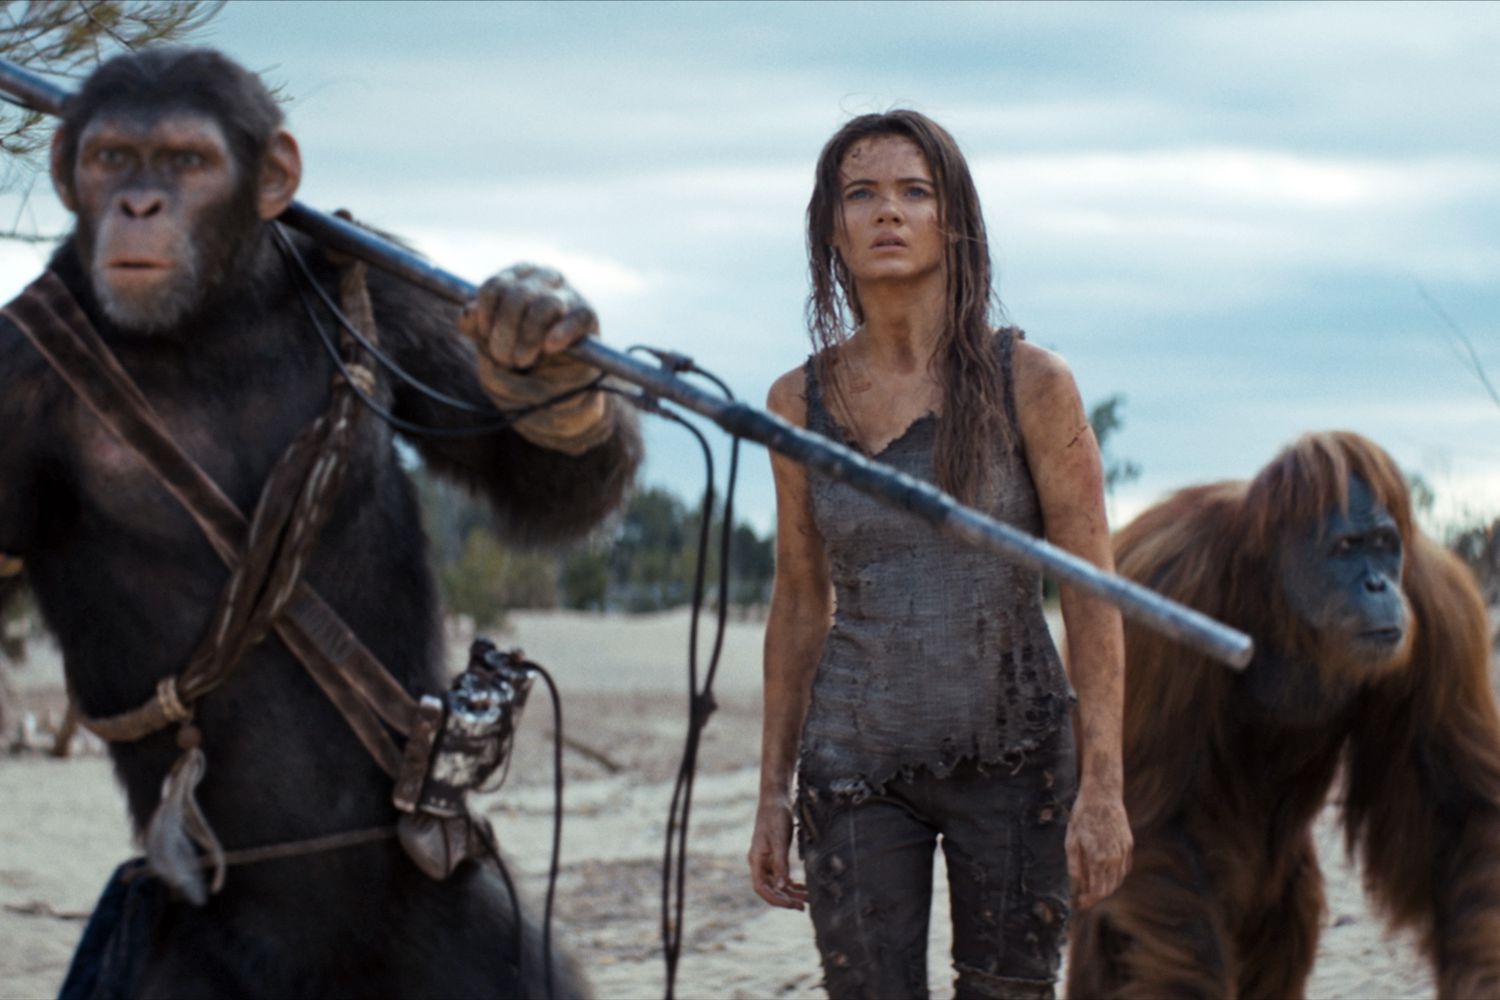 Noa (played by Owen Teague) , Freya Allan as Nova and Raka (played by Peter Macon) in 20th Century Studios' KINGDOM OF THE PLANET OF THE APES.